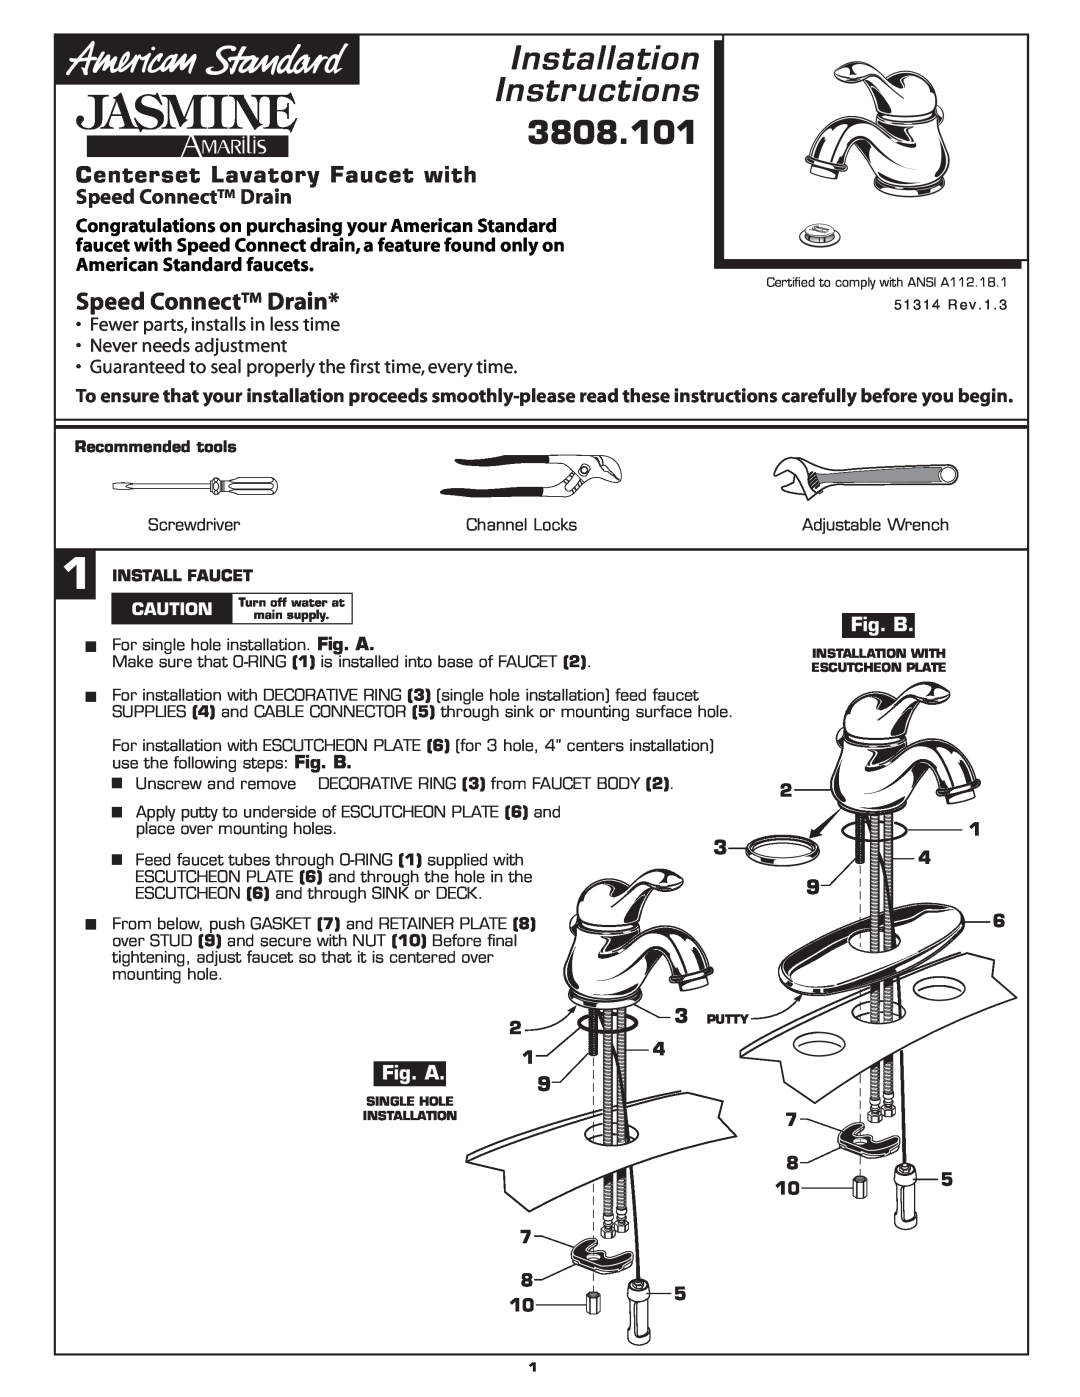 American Standard 3808.101 installation instructions Installation Instructions, Speed Connect Drain, Fig. B, Fig. A 